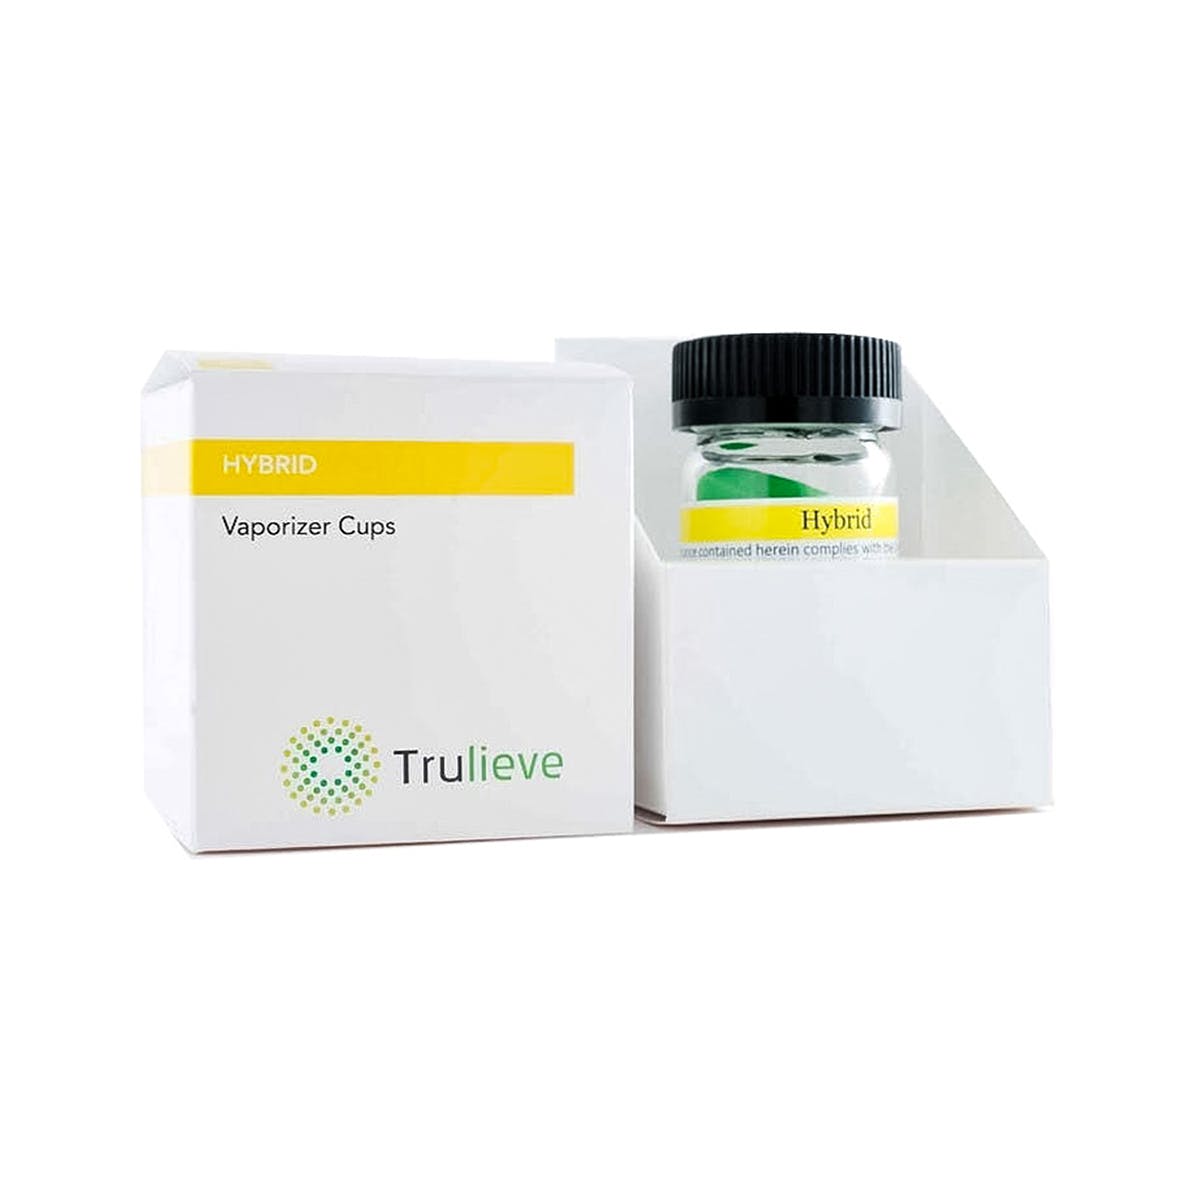 marijuana-dispensaries-trulieve-fort-myers-in-fort-myers-vaporizer-cup-4-pack-hybrid-gsc